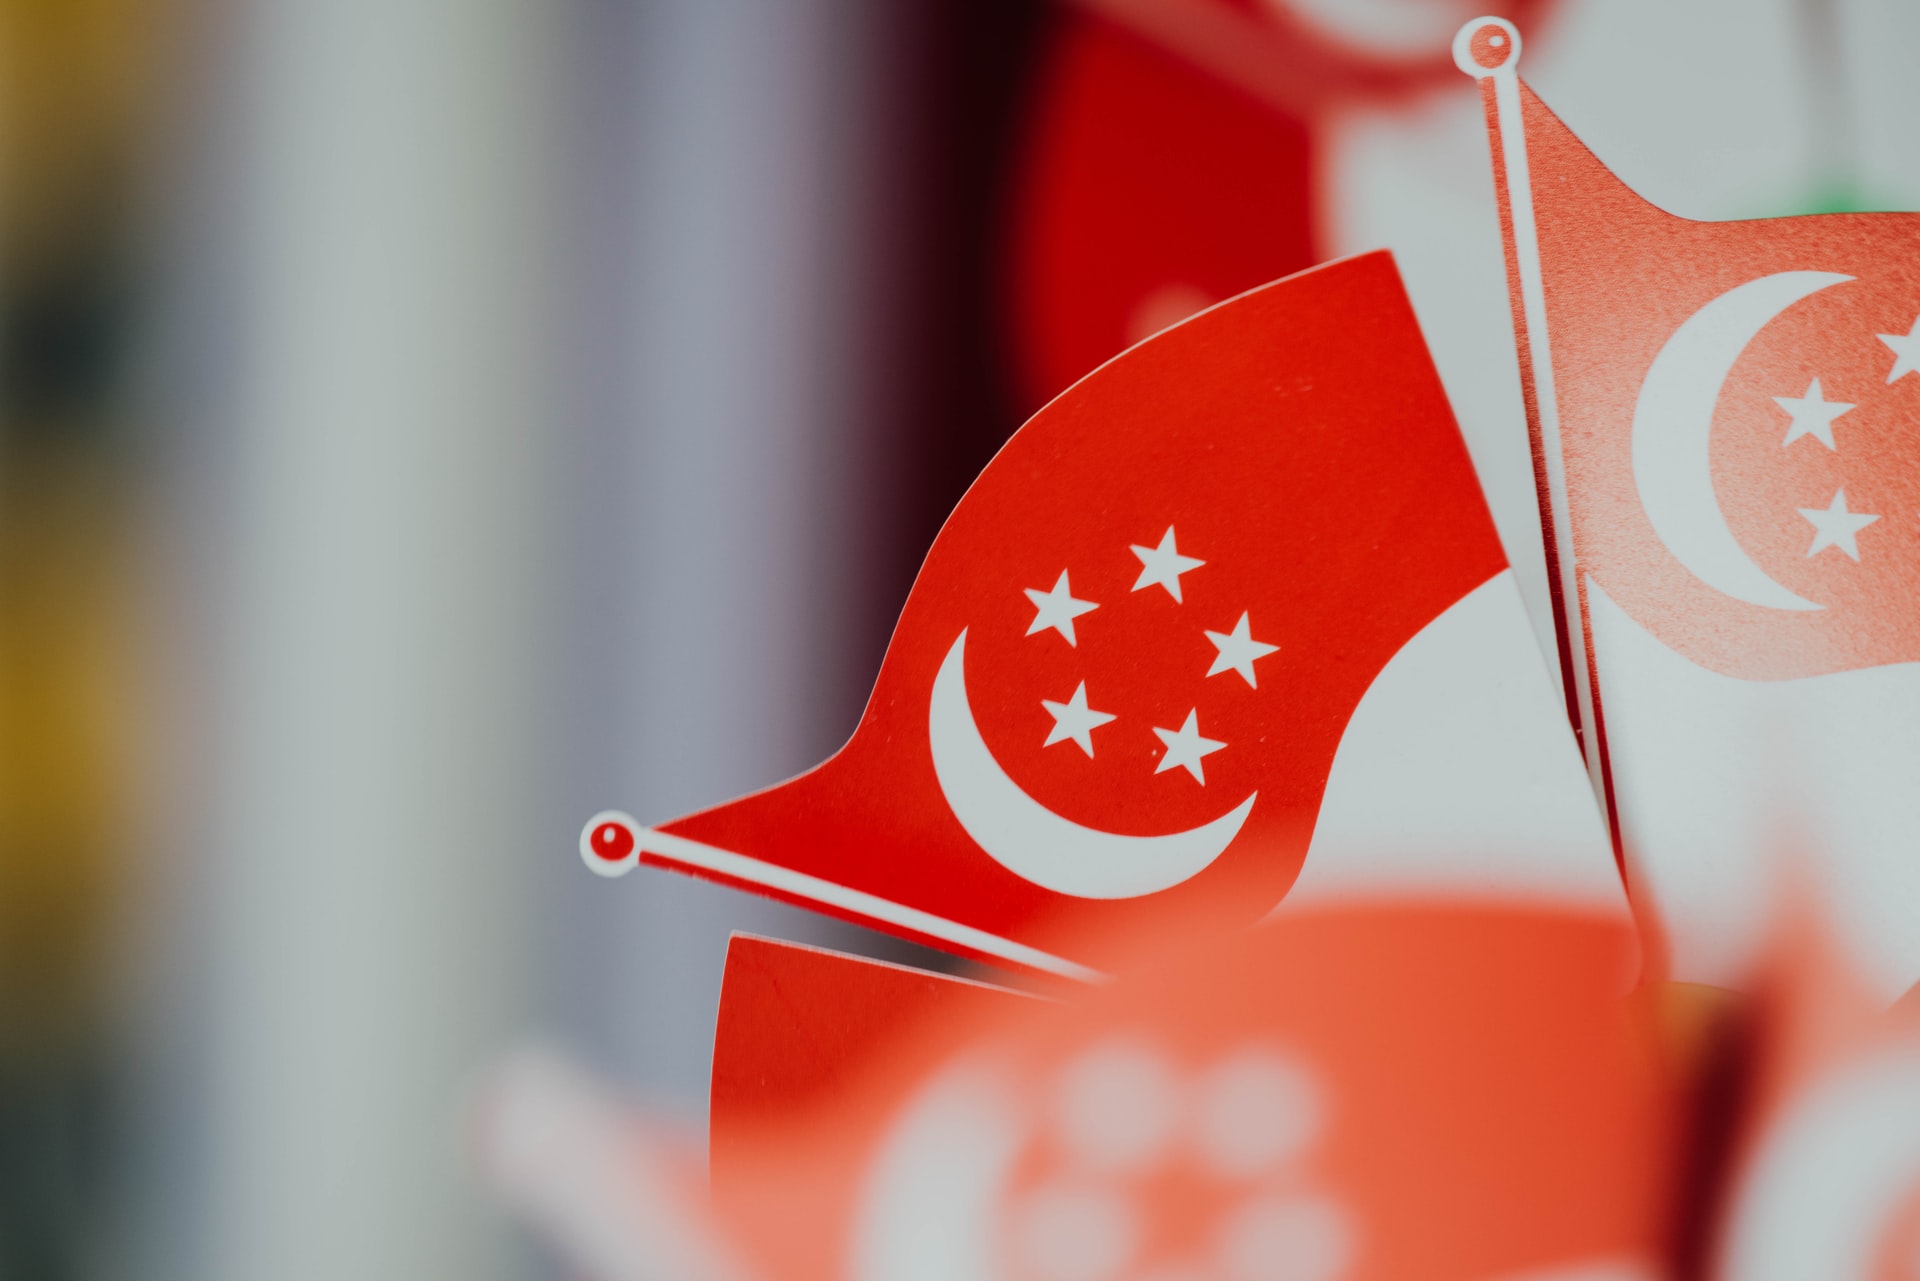 Singapore flags